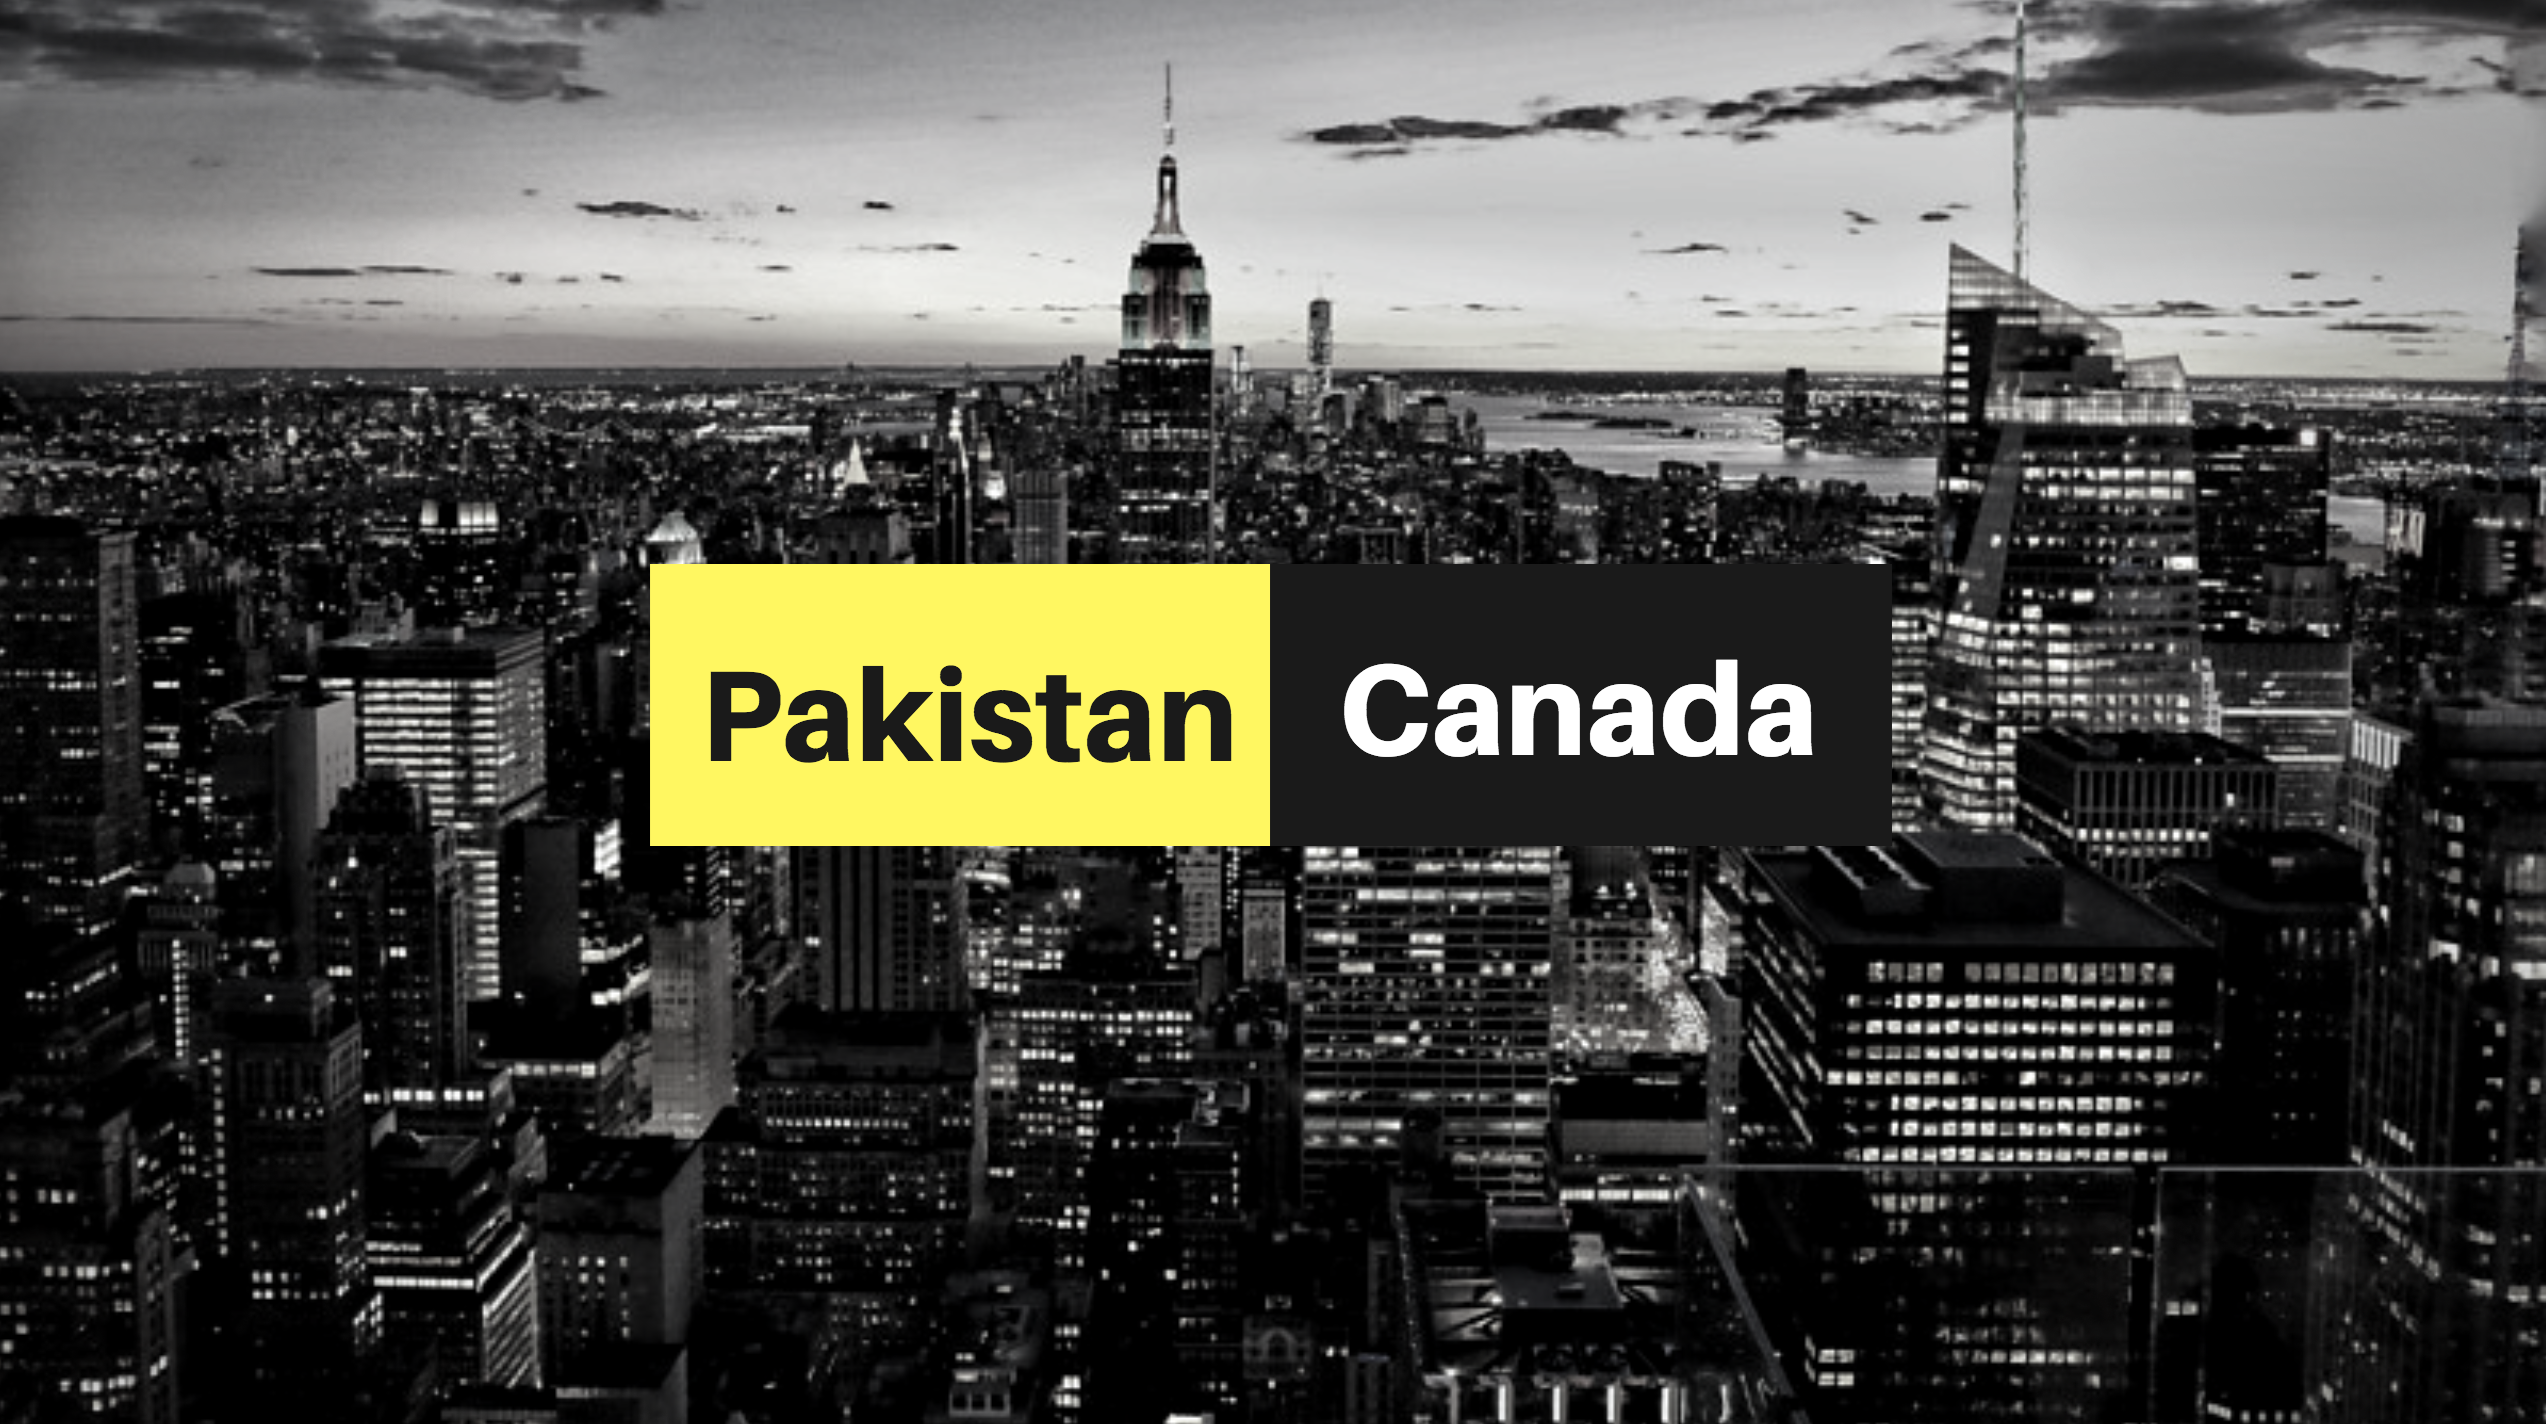 Canada and Pakistan on the same page: Toward strengthening ties through regular diplomatic interactions